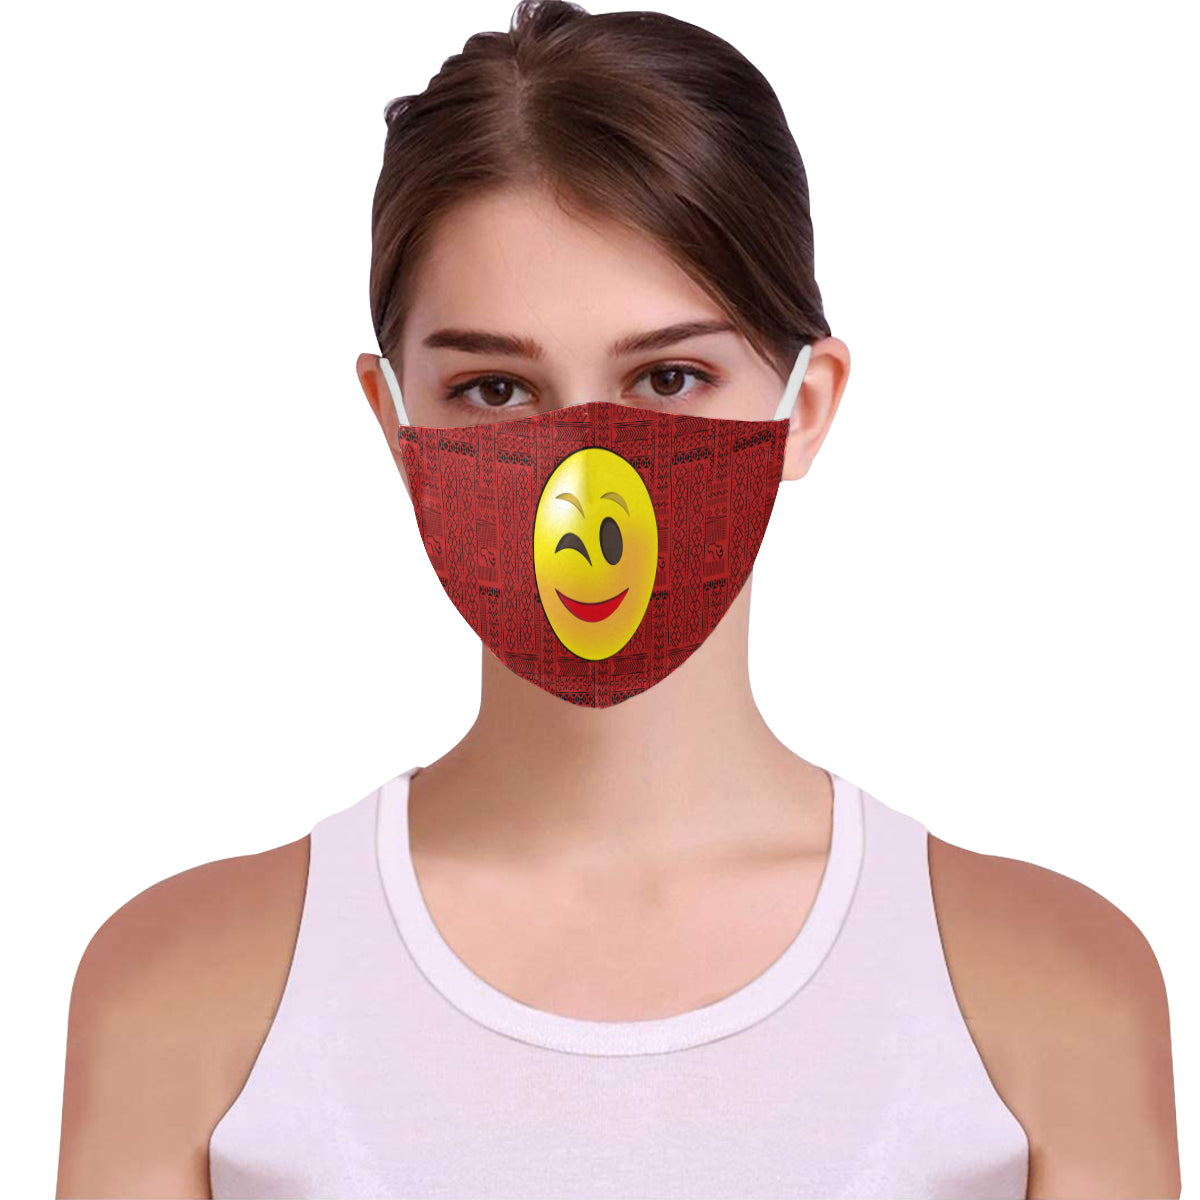 Wink Tribal Print Emoji Cotton Fabric Face Mask with Filter Slot and Adjustable Strap - Non-medical use (2 Filters Included)